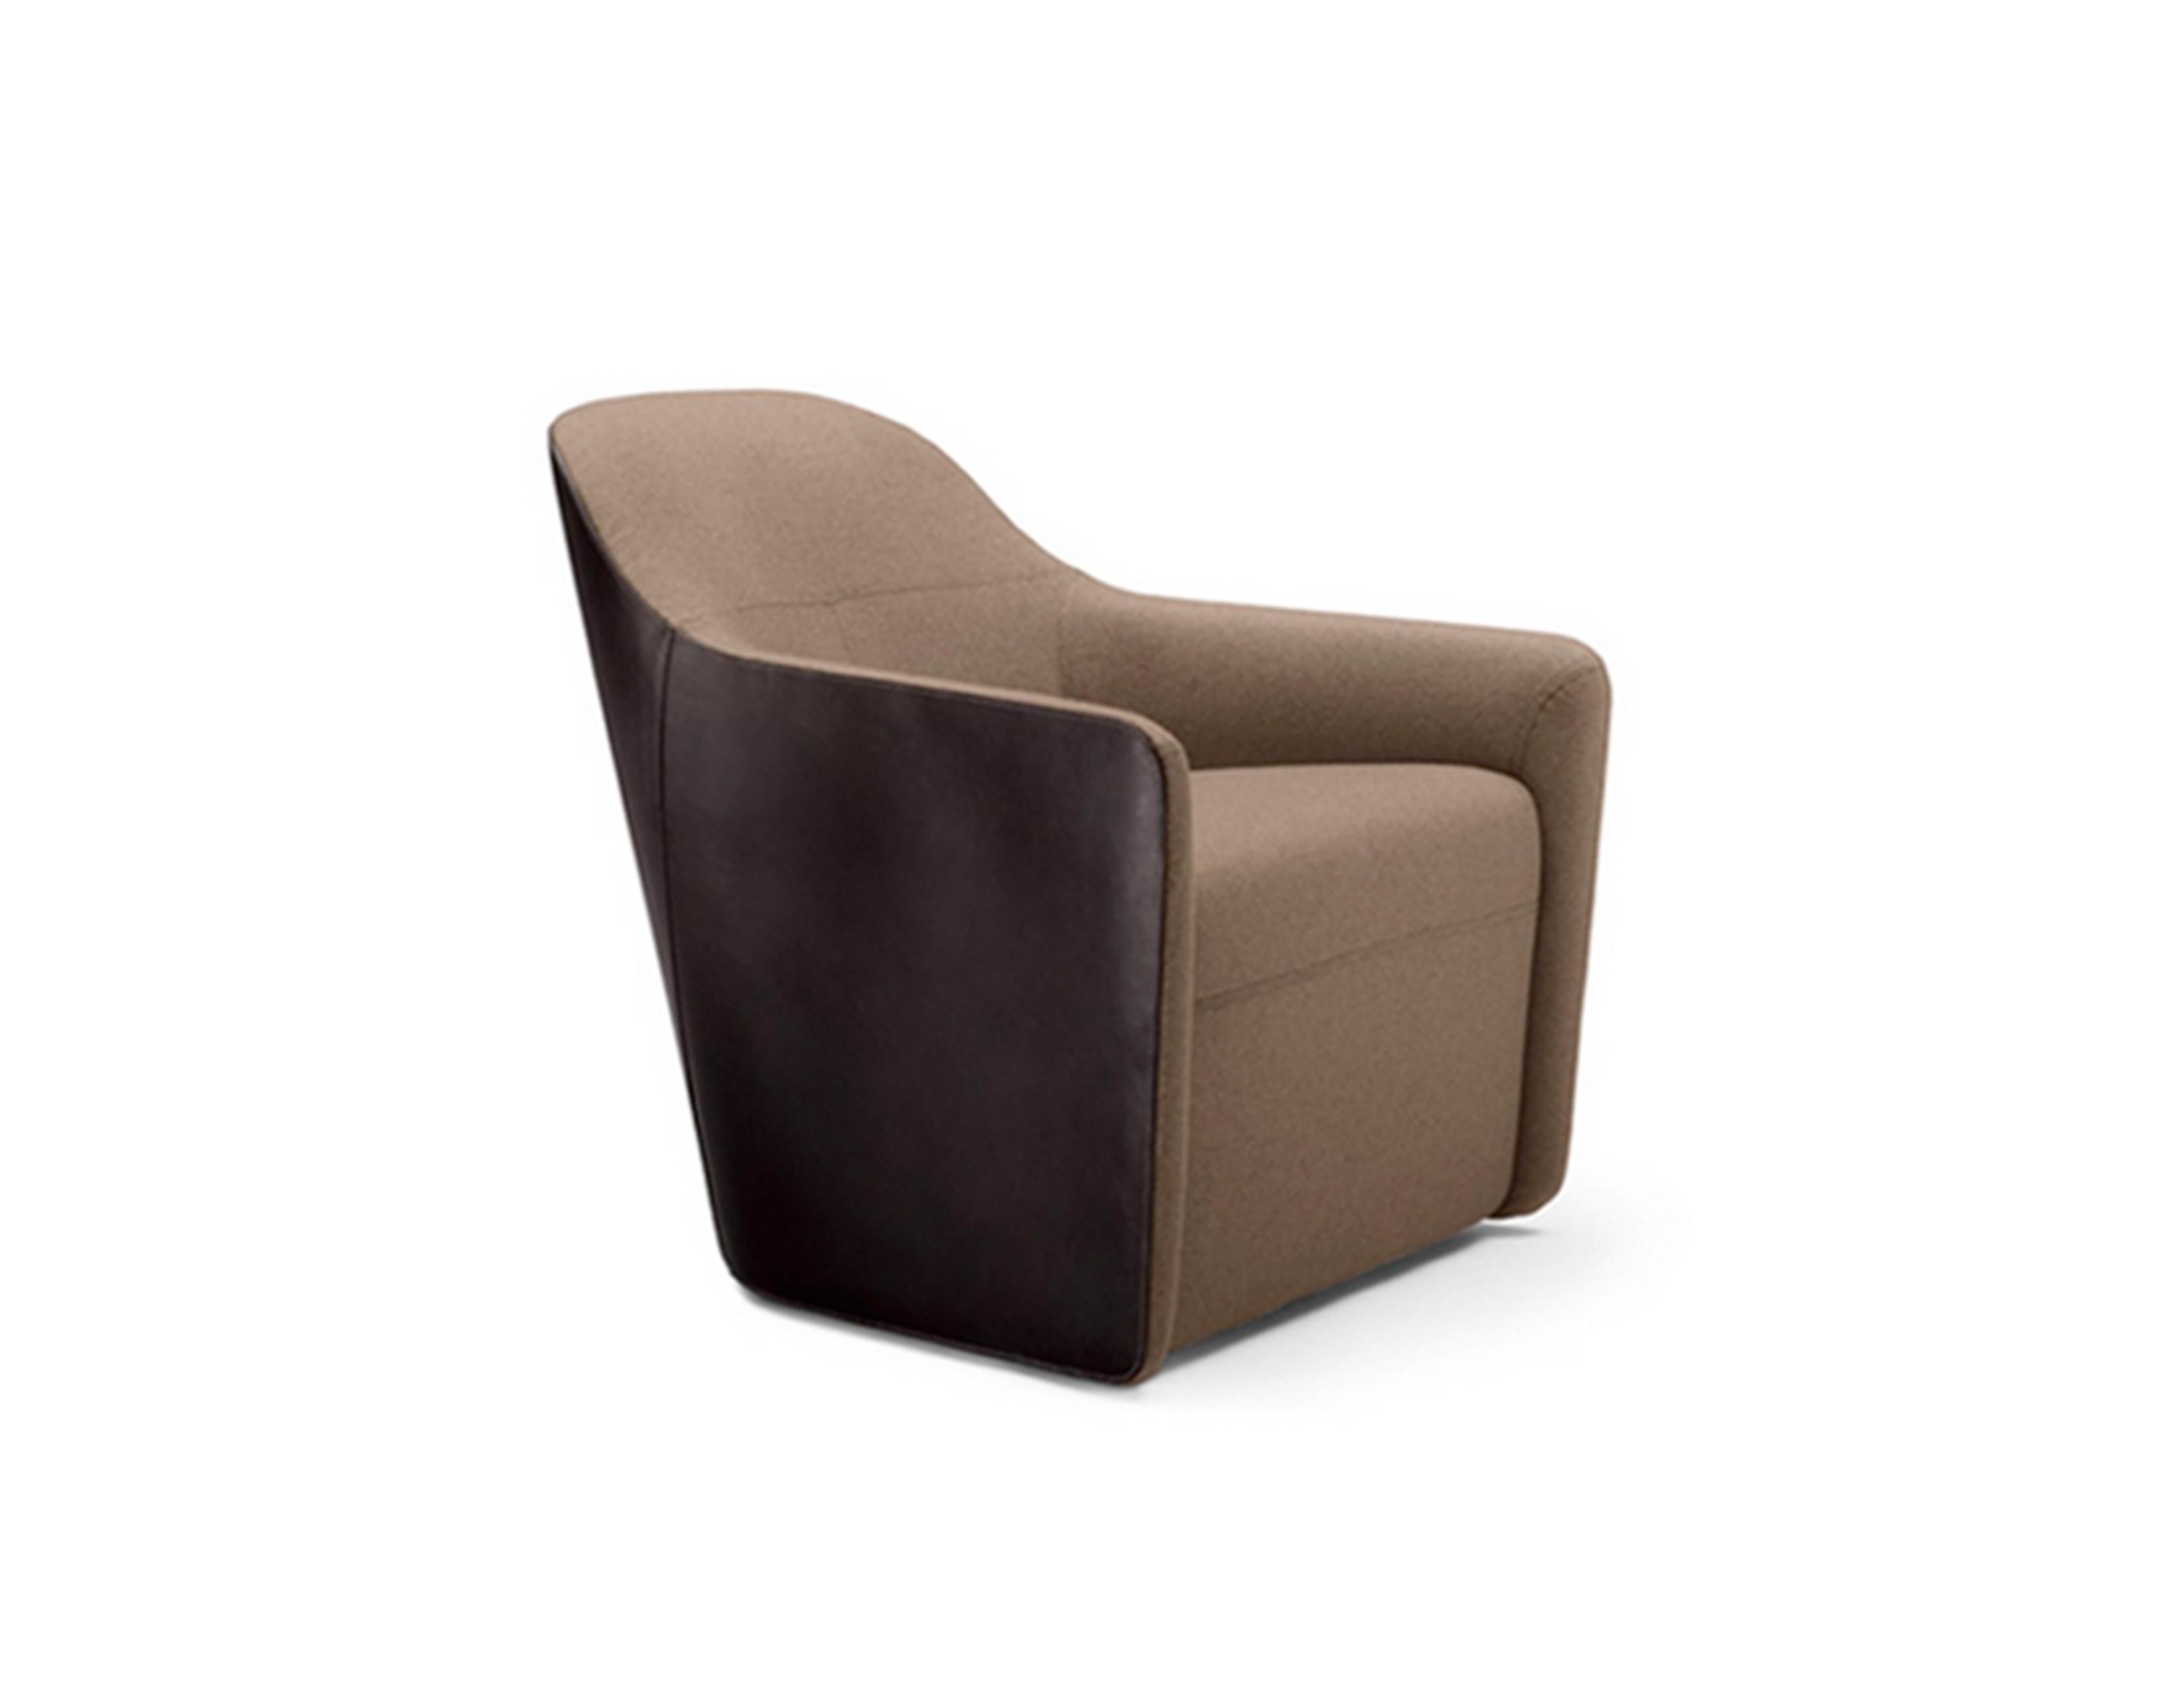 Foster 521 LB swivel armchair and ottoman: UPH: Divina Melange 260/coffee saddle
Model# 521-10 C (armchair)
Original $5,217
The Foster 521 armchair reinterprets the tradition of the club armchair. The designer has made masterly use of the